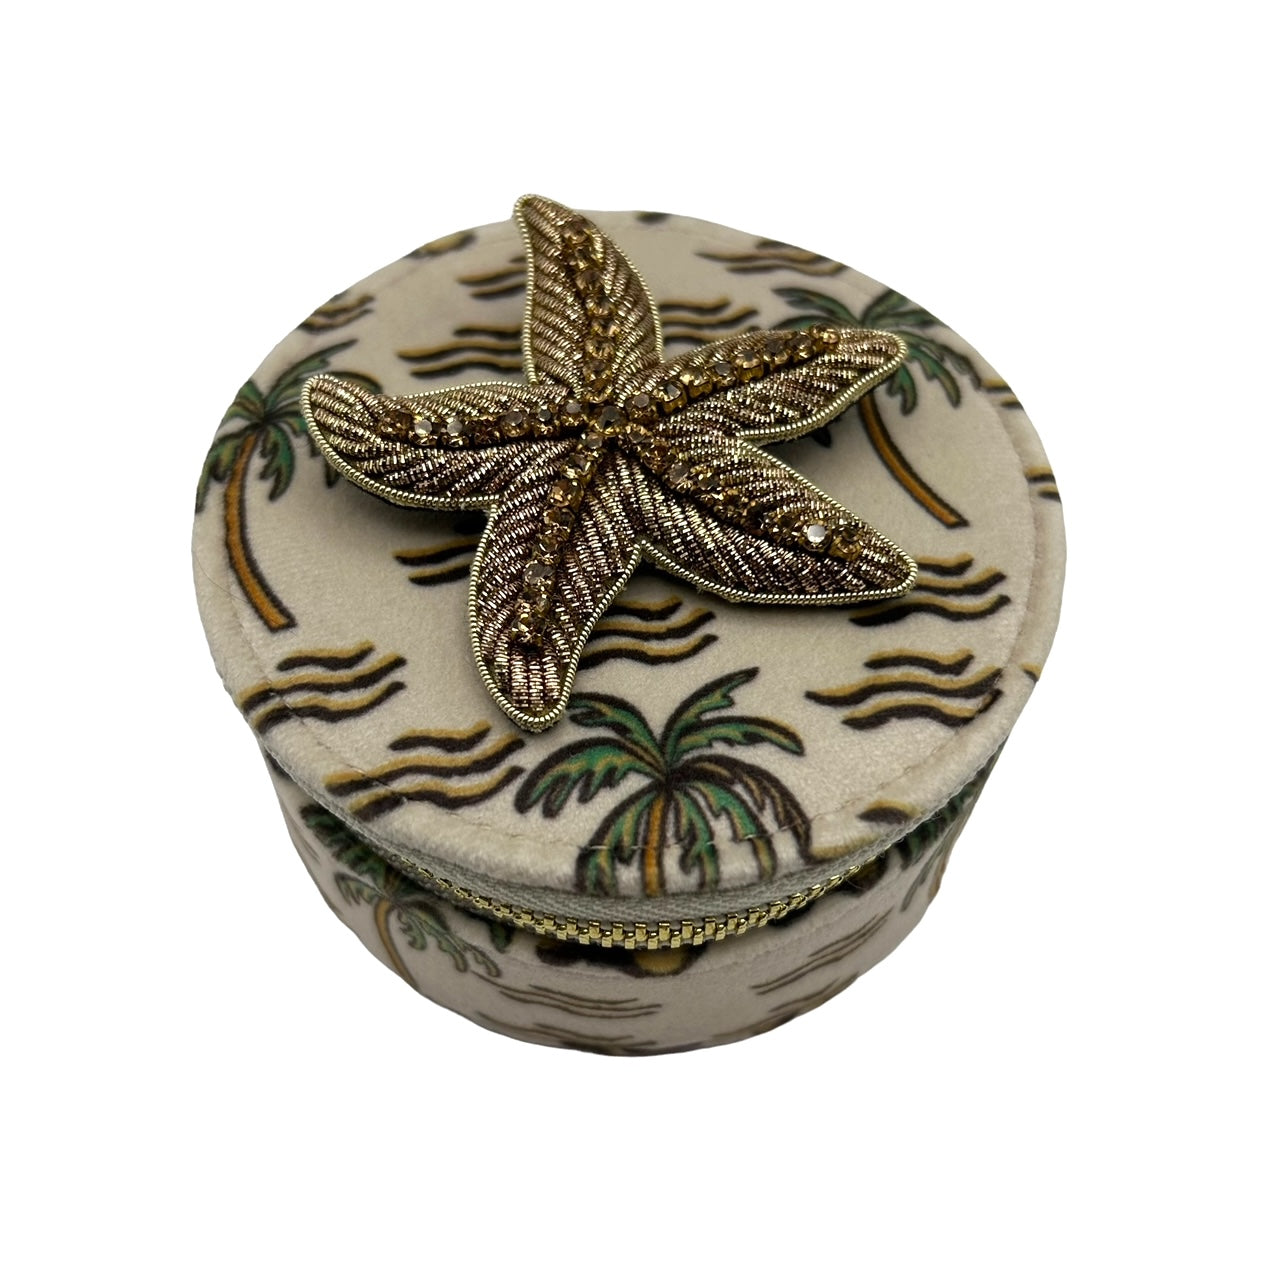 Jewellery travel pot in sand palm print with starfish brooch